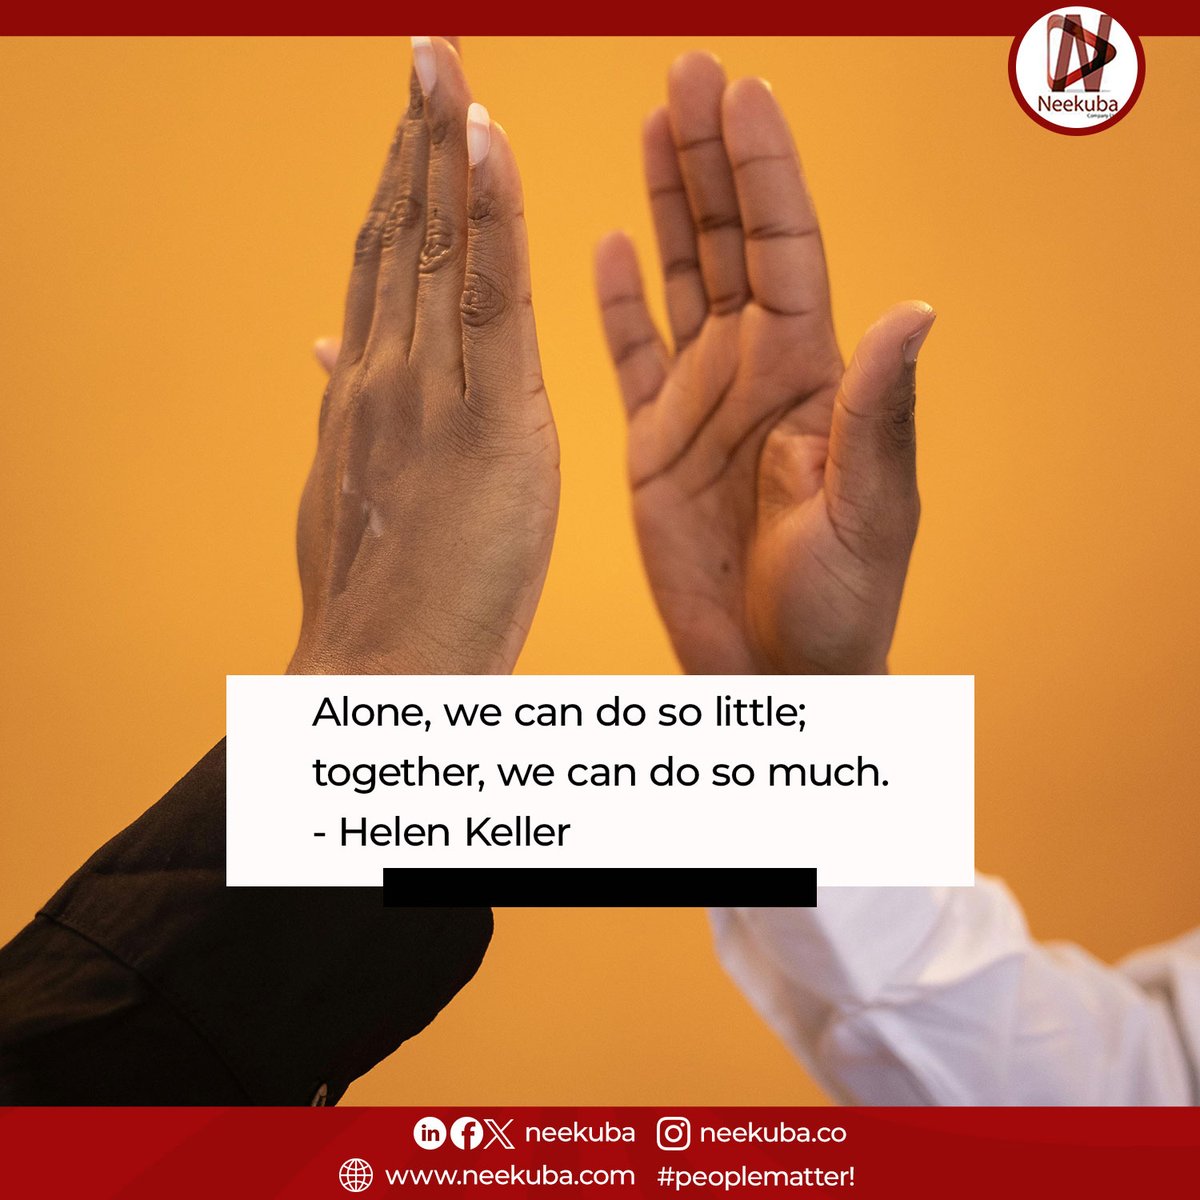 Alone, we can do so little; together, we can do so much.
- Helen Keller

#neekuba #peoplematter #together